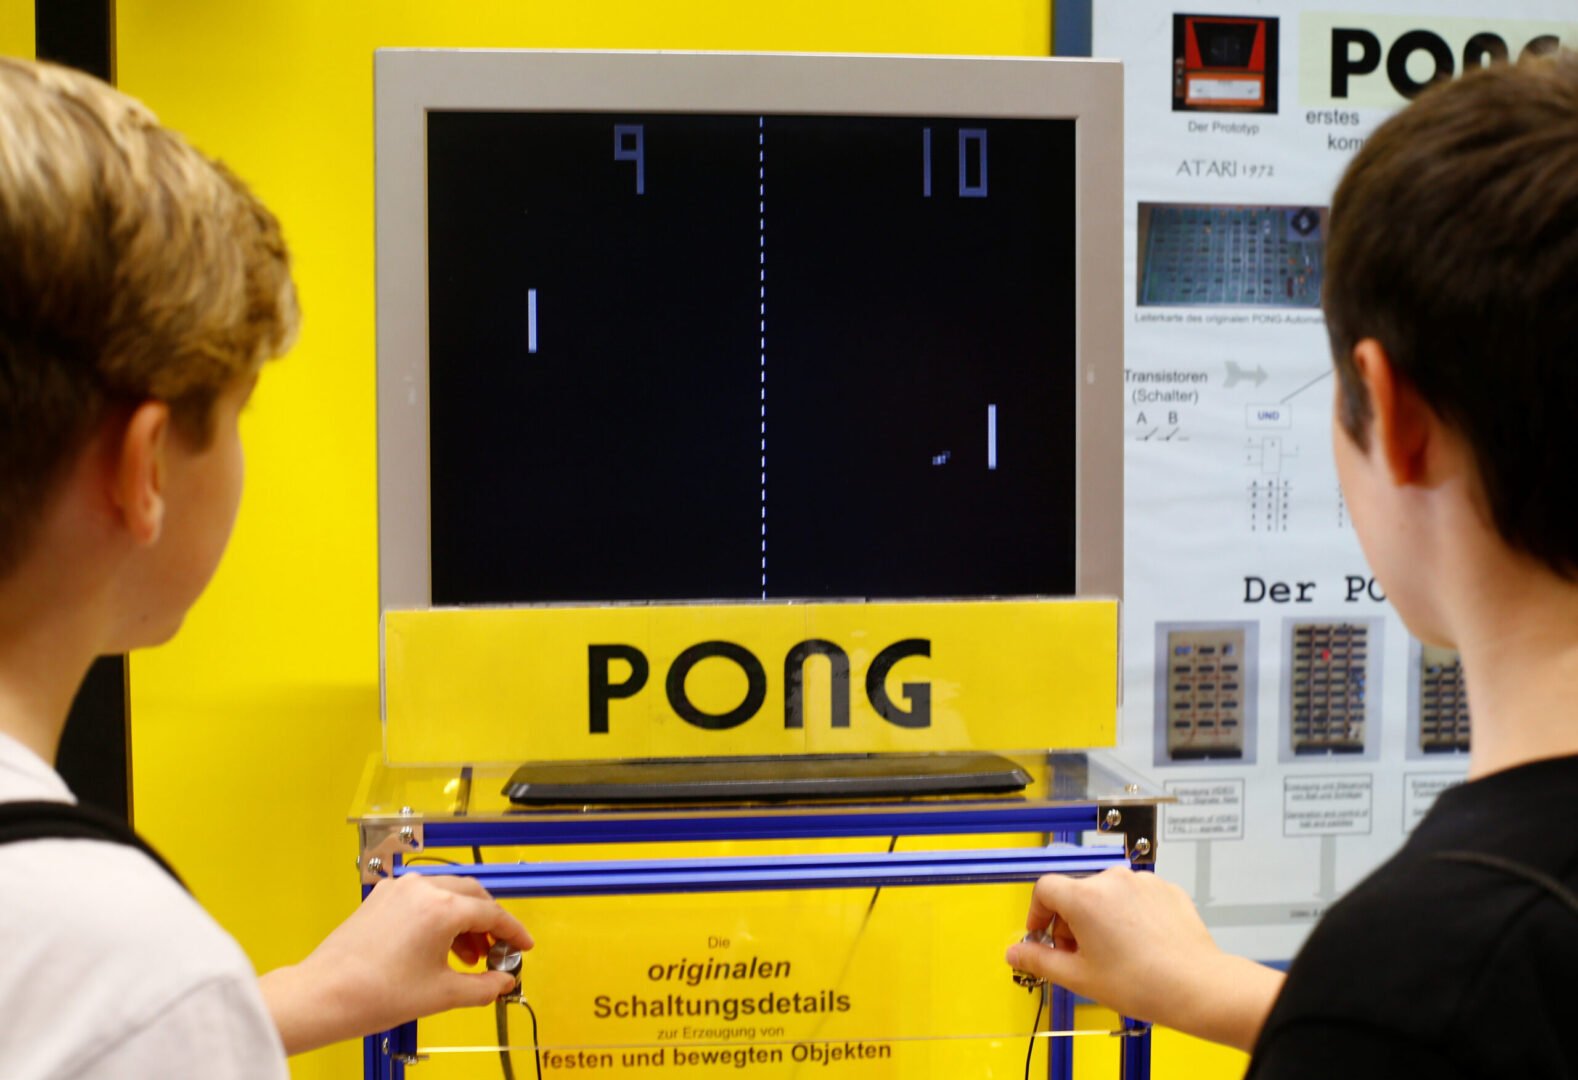 Pong’s influence on video games endures 50 years later